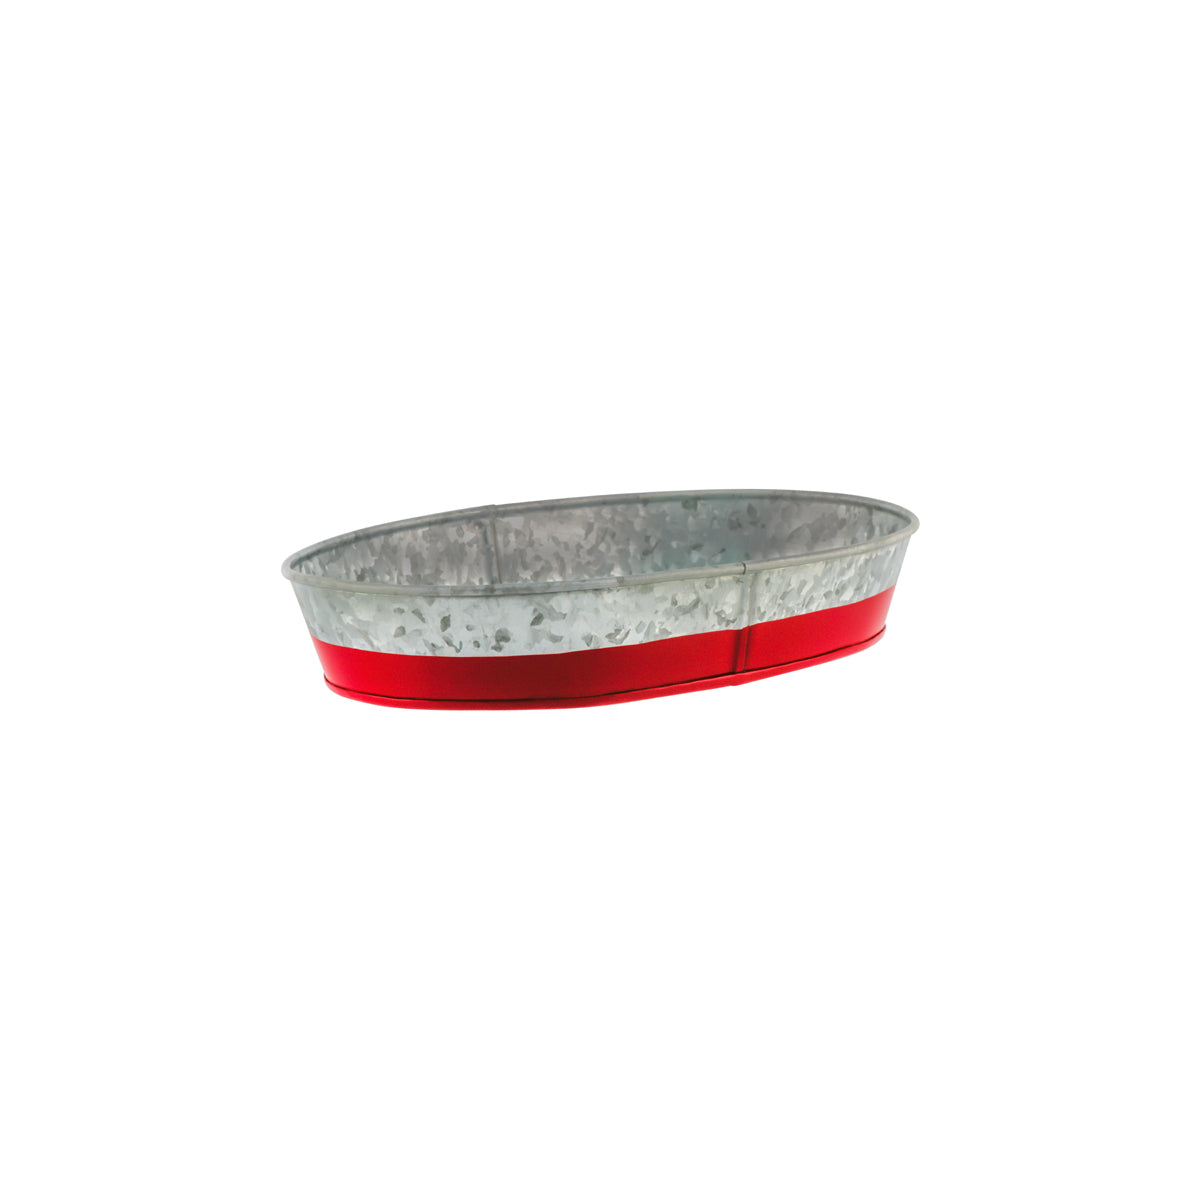 78652 Chef Inox Coney Island Oval Tray Galvanised with Red Base 240x150x45mm Tomkin Australia Hospitality Supplies